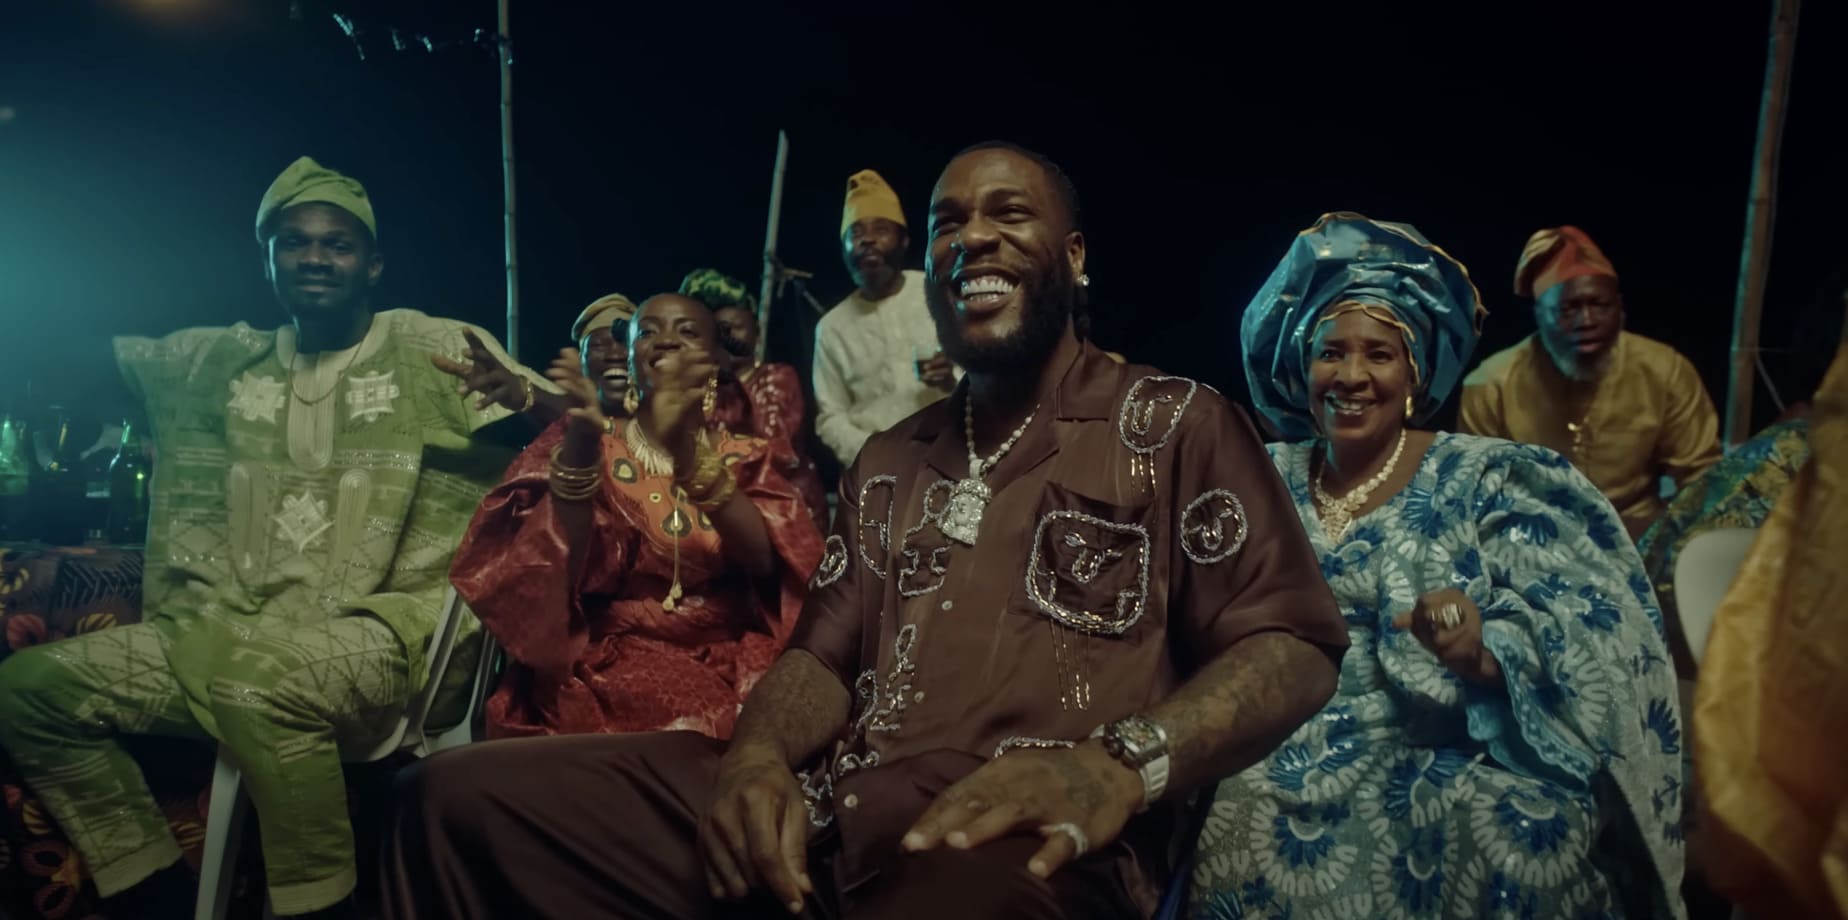 Burna Boy - Common Person [Official Music Video]